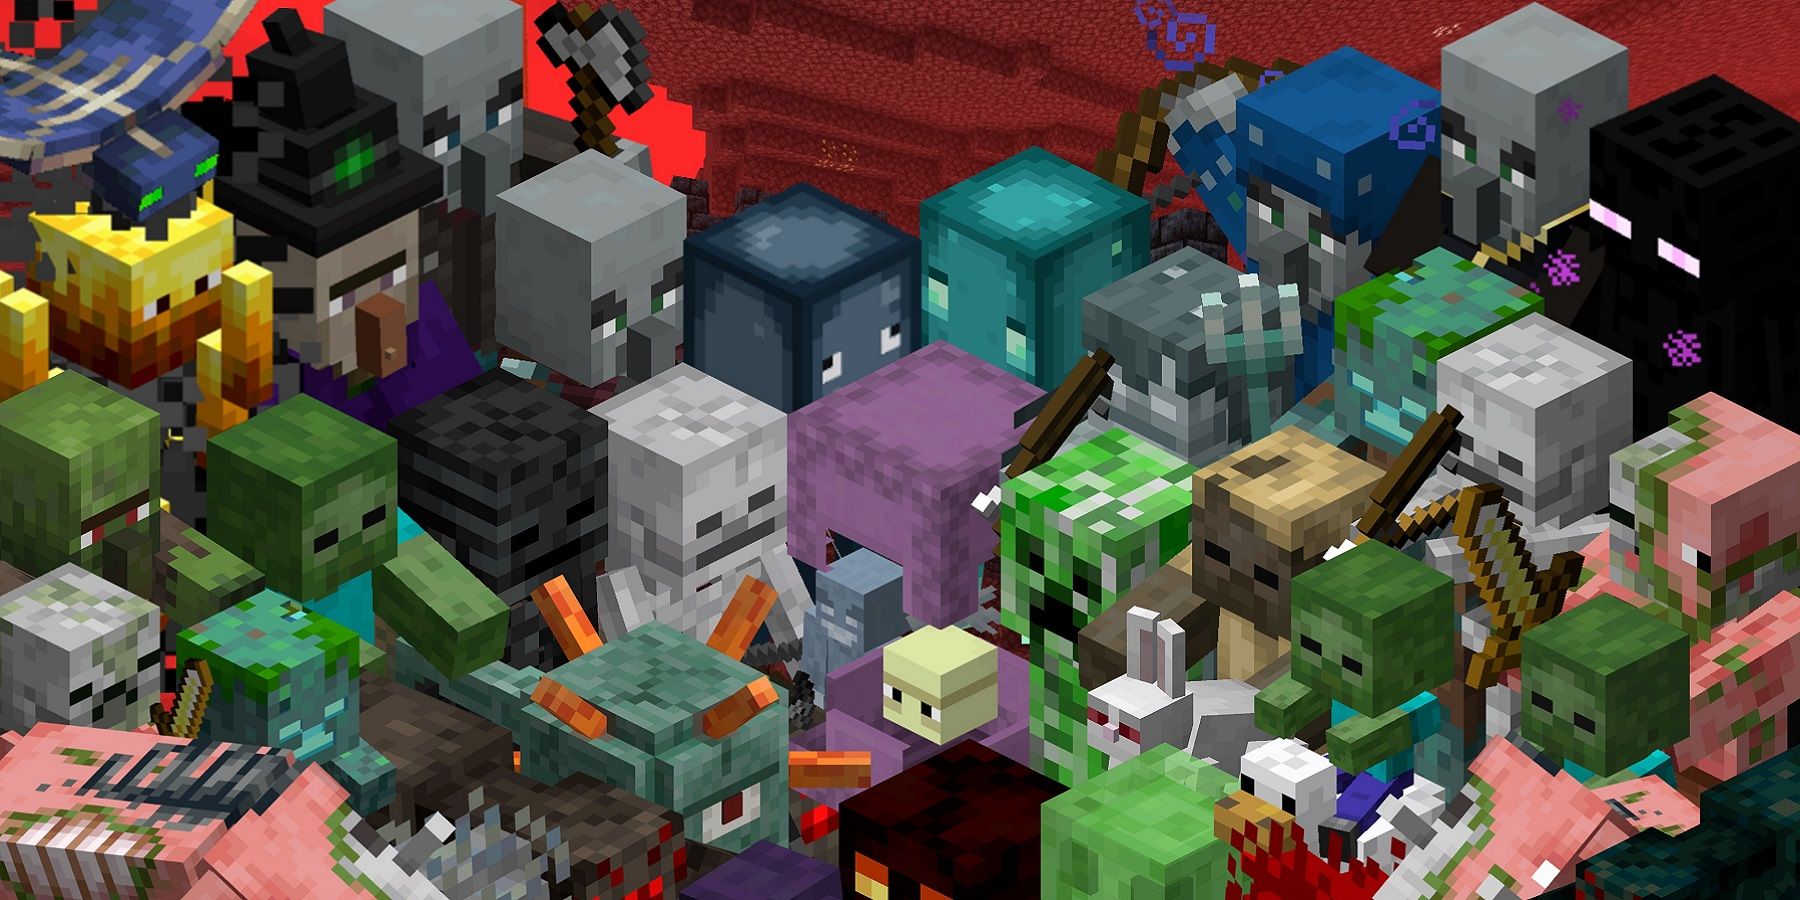 Image from Minecraft that crams as many mobs into the picture as possible.